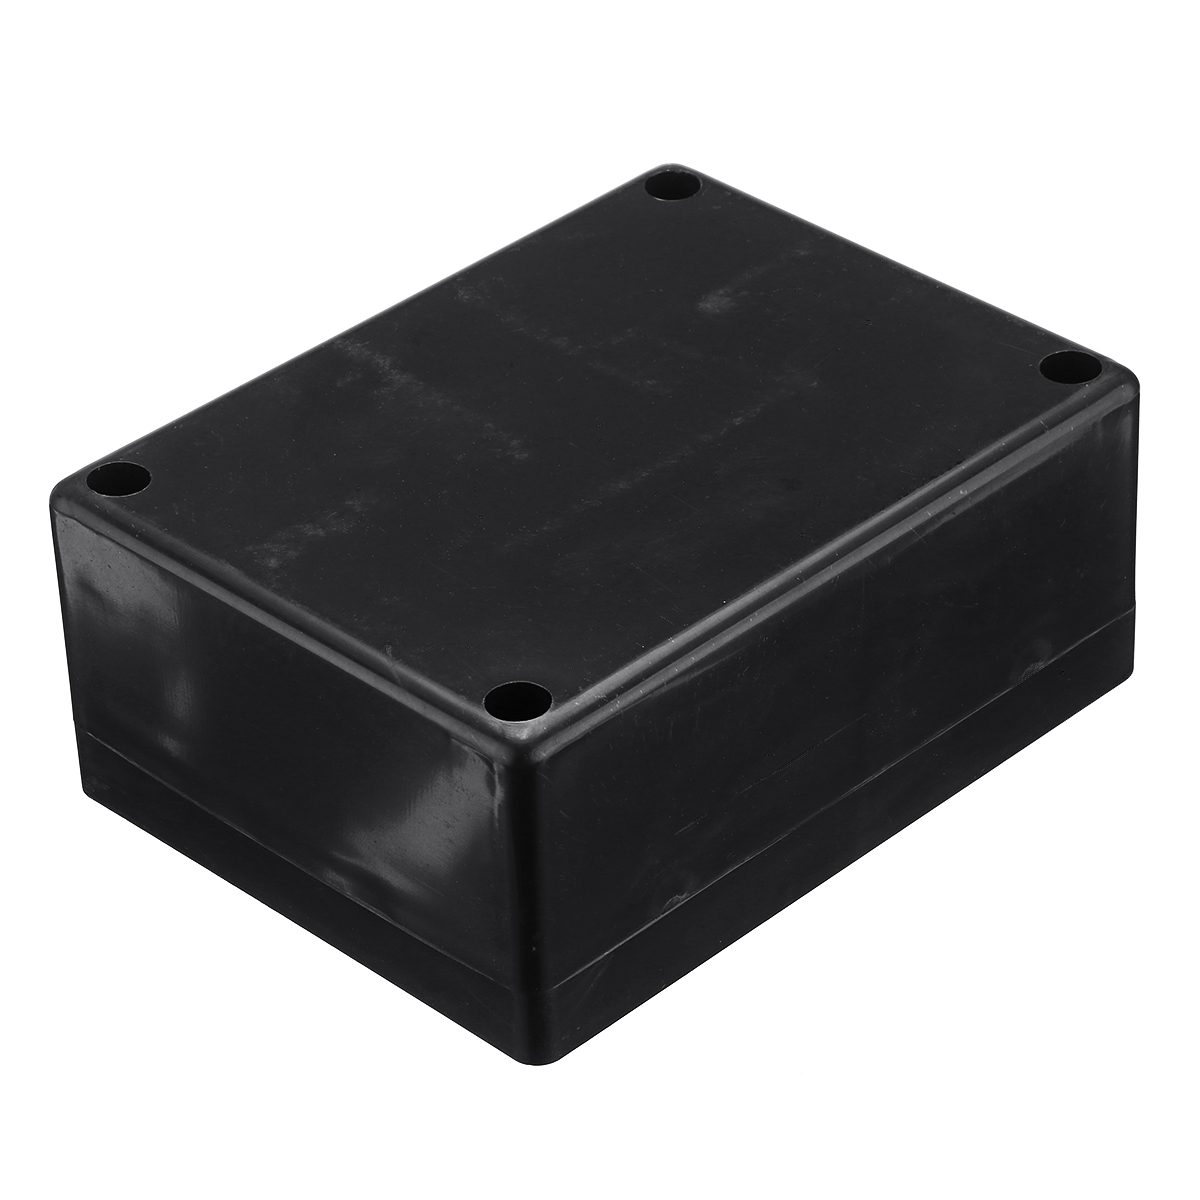 0-99999Omega-Variable-Resistor-Substitution-Box-Ohm-Adjustable-Substitution-Resistance-Knob-Switch-P-1443989-6